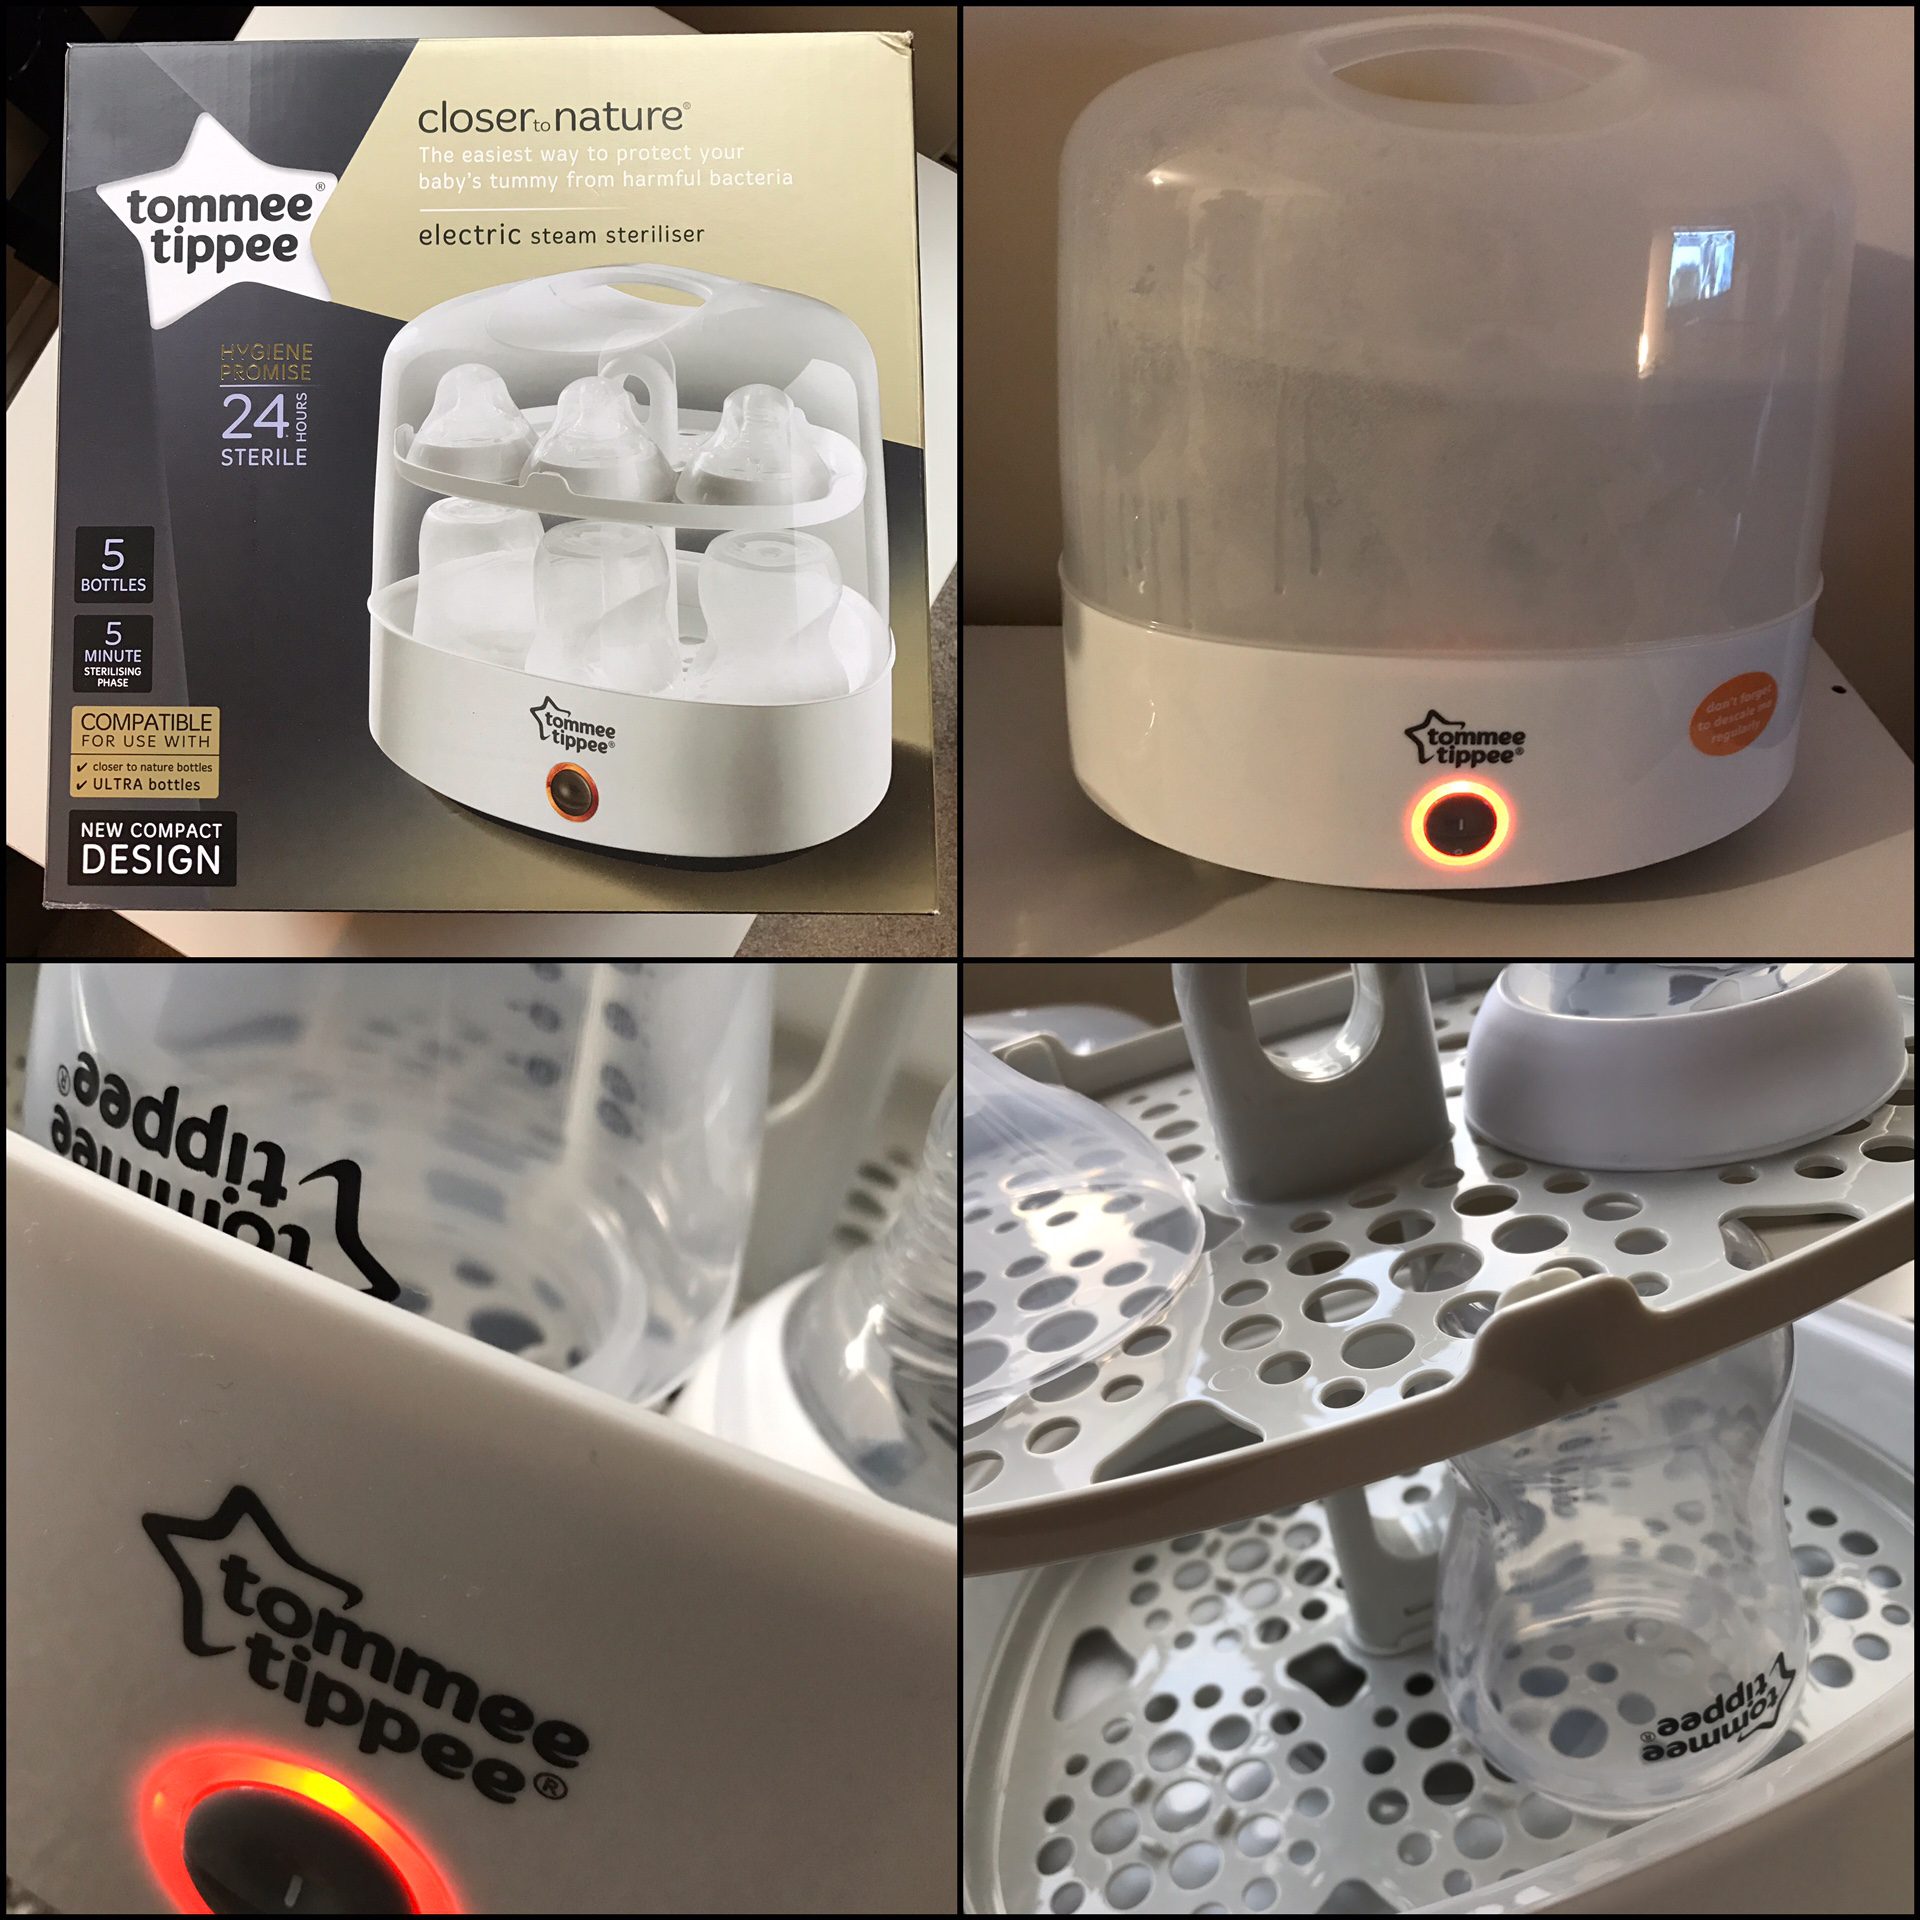 REVIEW - Tommee Tippee Closer to Nature Electric Steam Steriliser